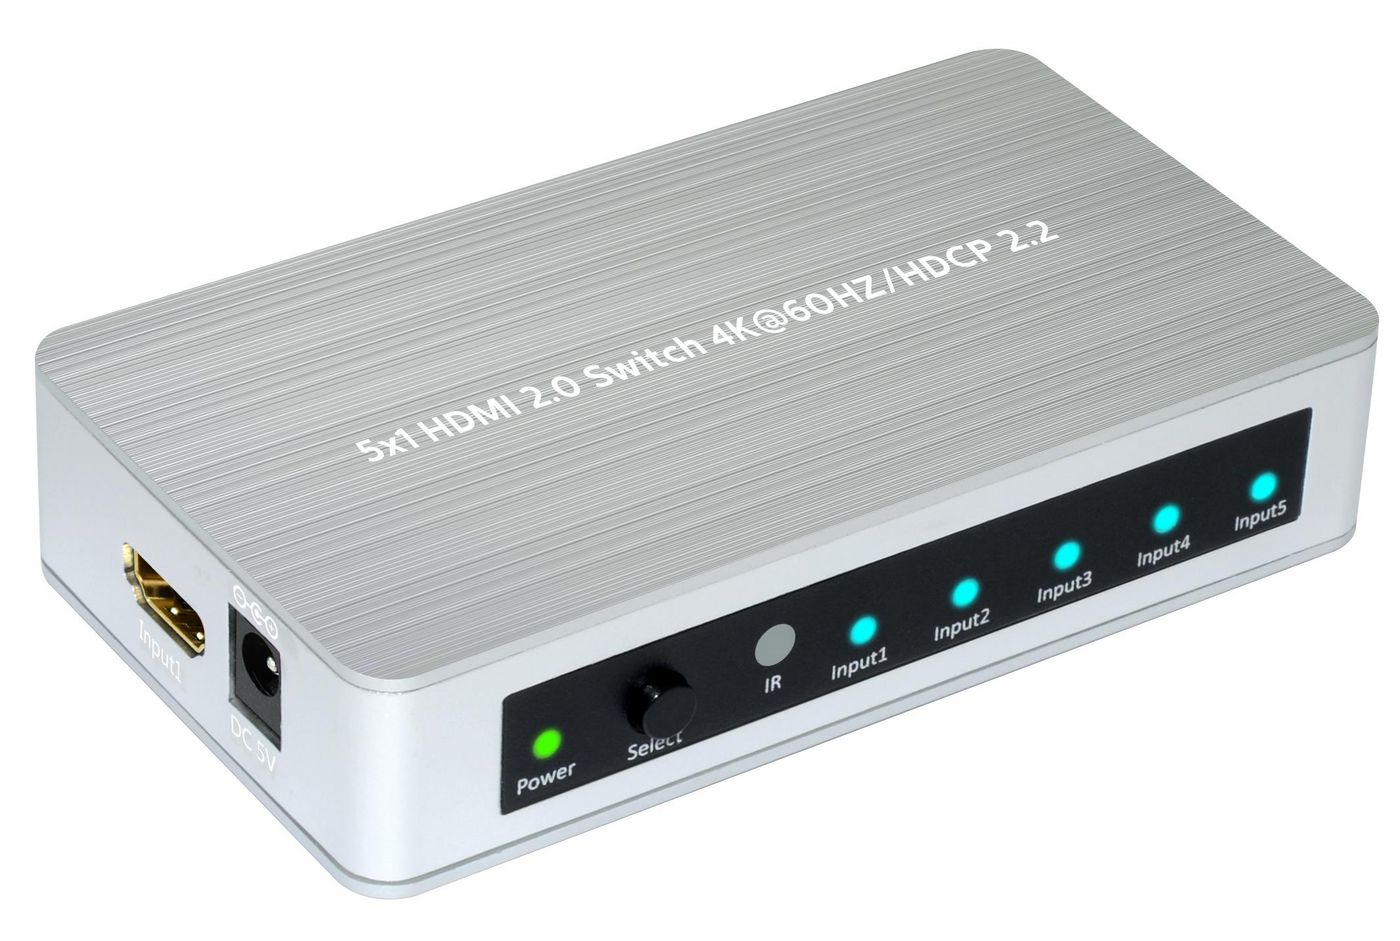 Hdmi 2.0 Switch 5 To 1 Way Supporting 4k 60hz / Hdcp2.2.